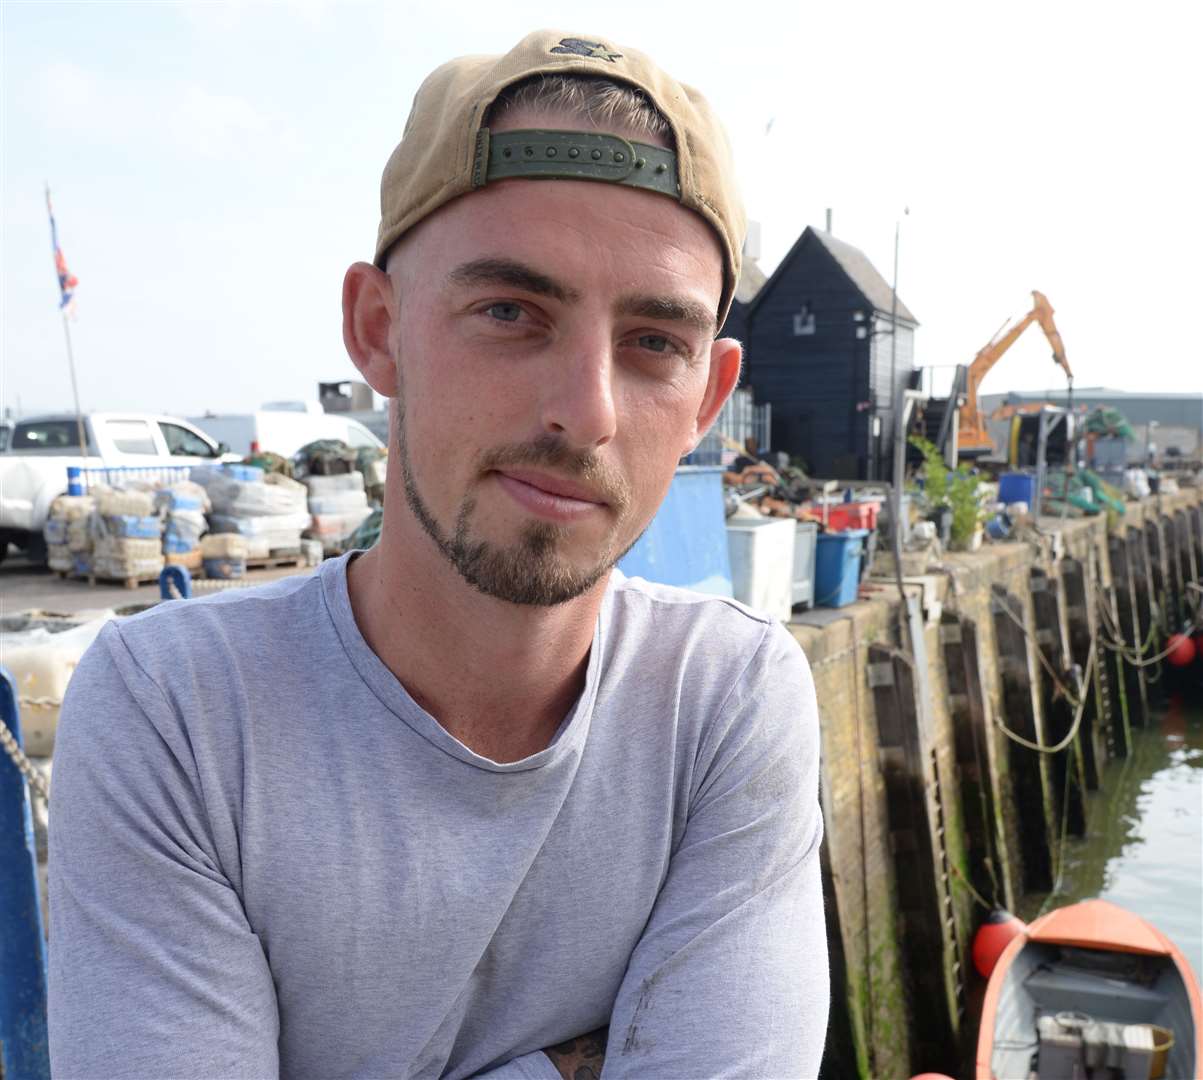 Fisherman Richard Foad says the ban has been "the biggest worry" in his fishing career